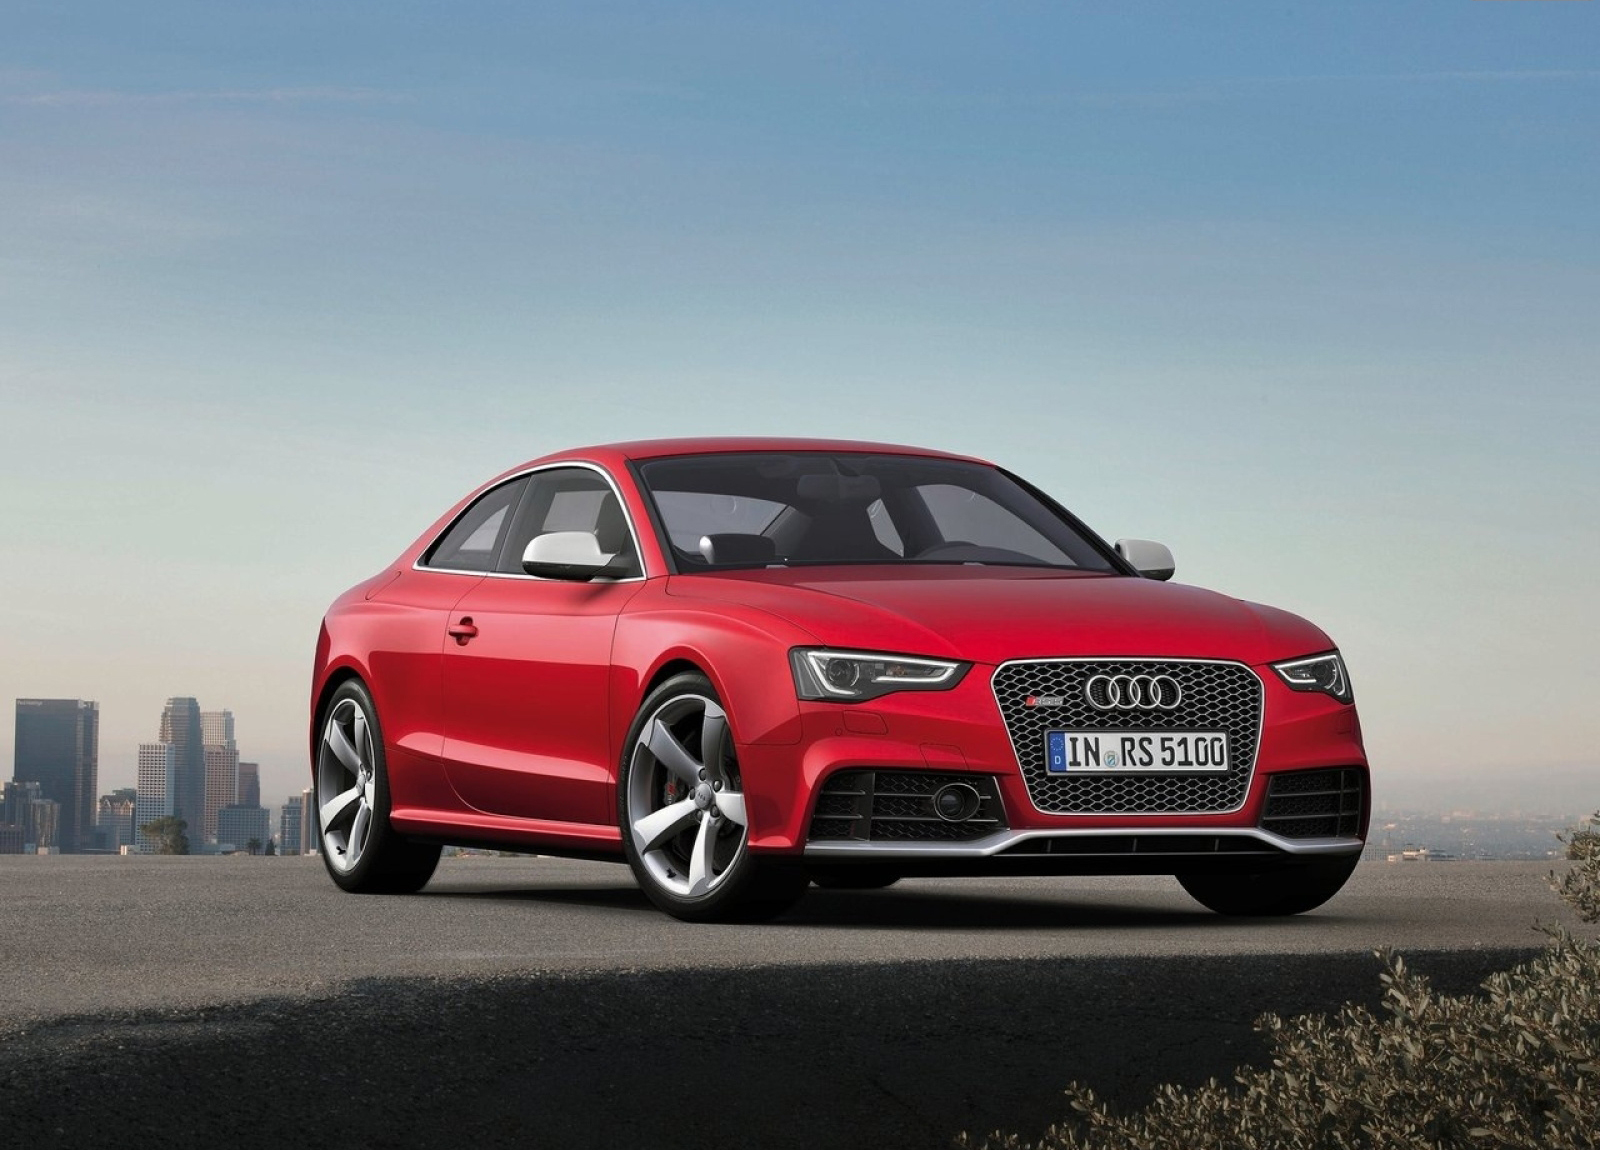 Audi Rs5 HD Wallpaper The World Of